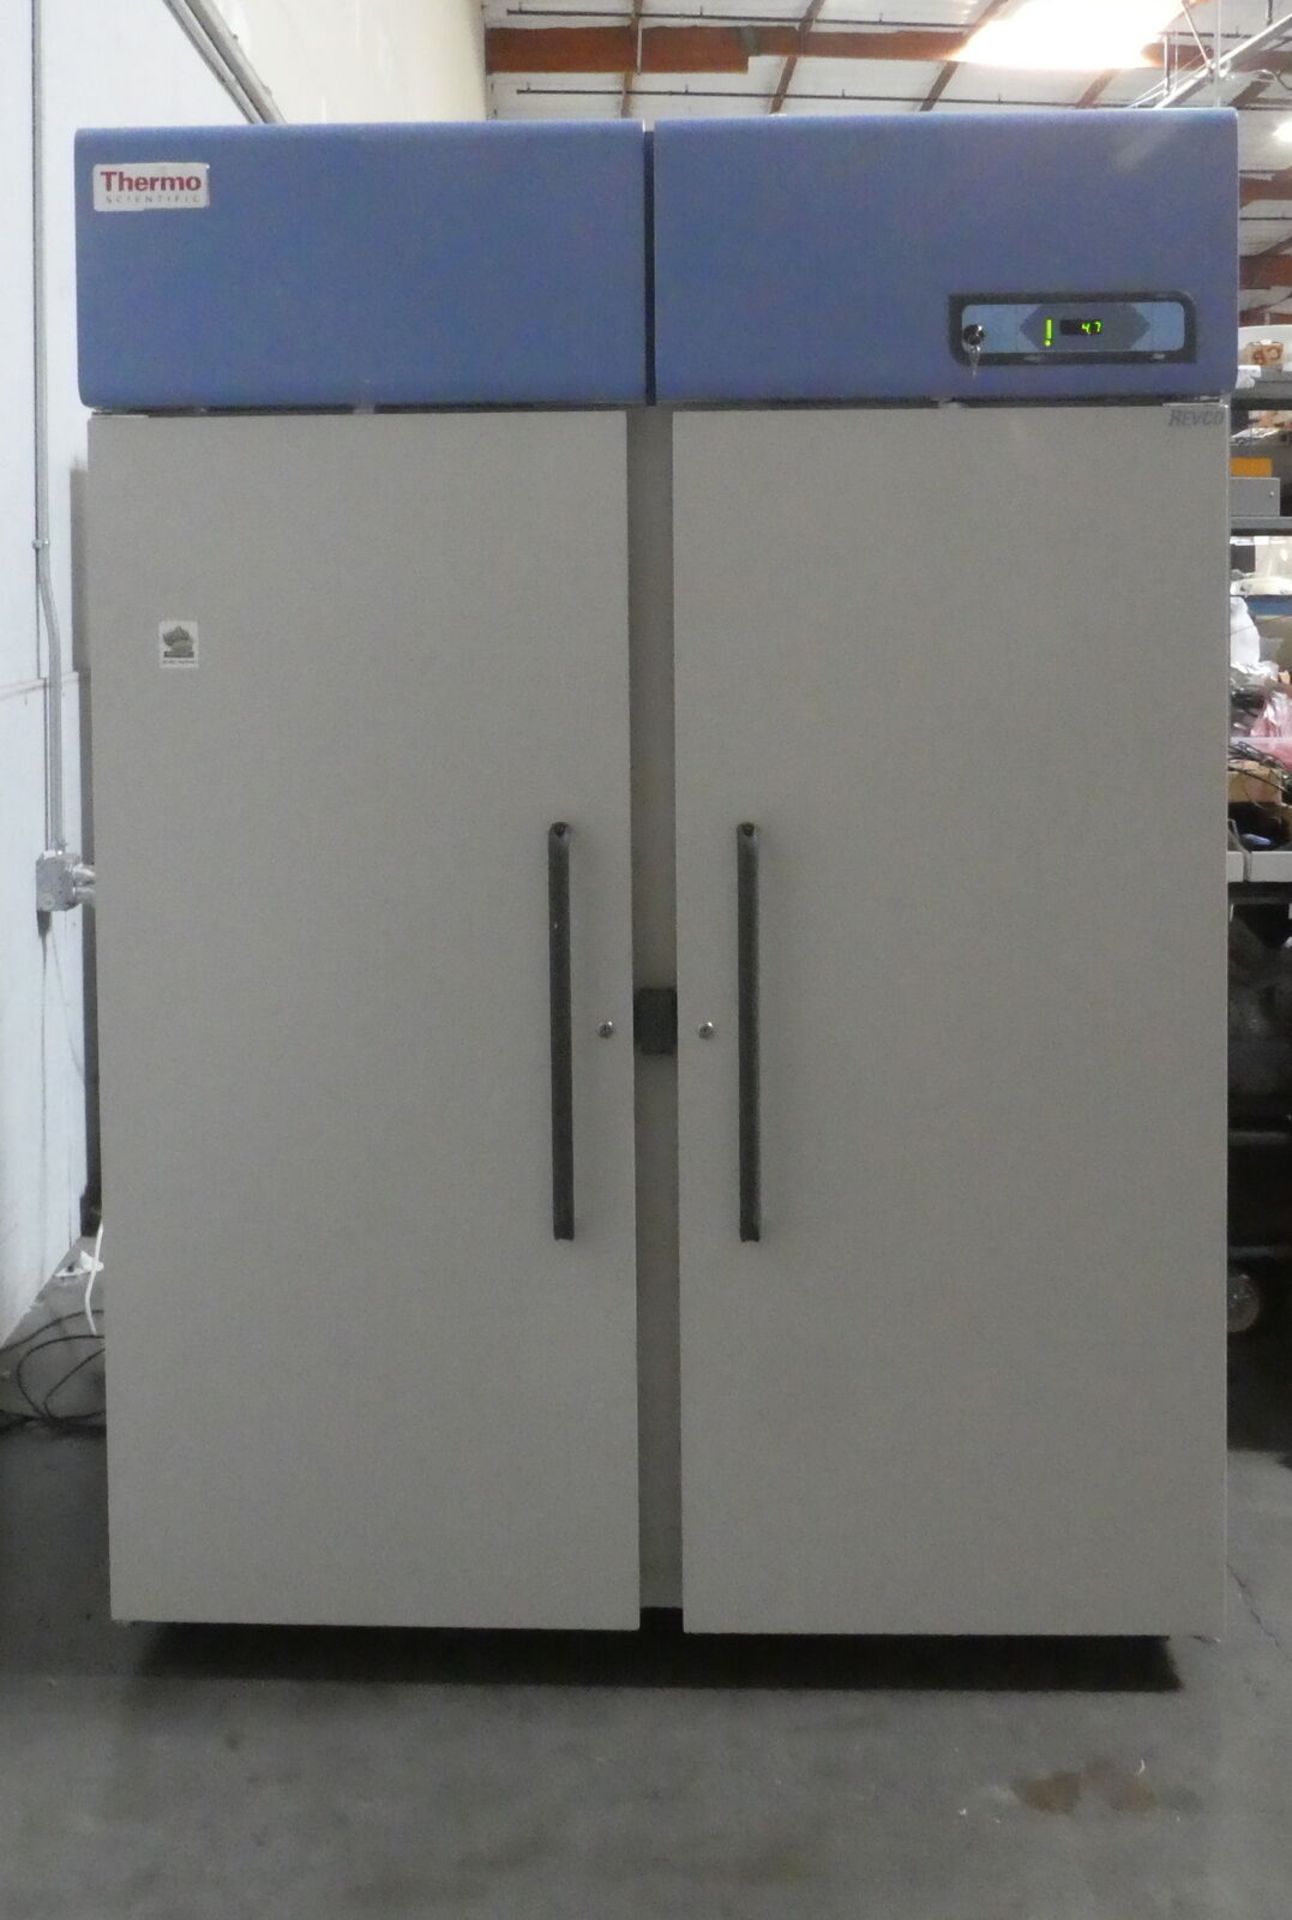 Thermo Fisher REL5004A25 Double Door Lab Refrigerator. Thermometer not included.